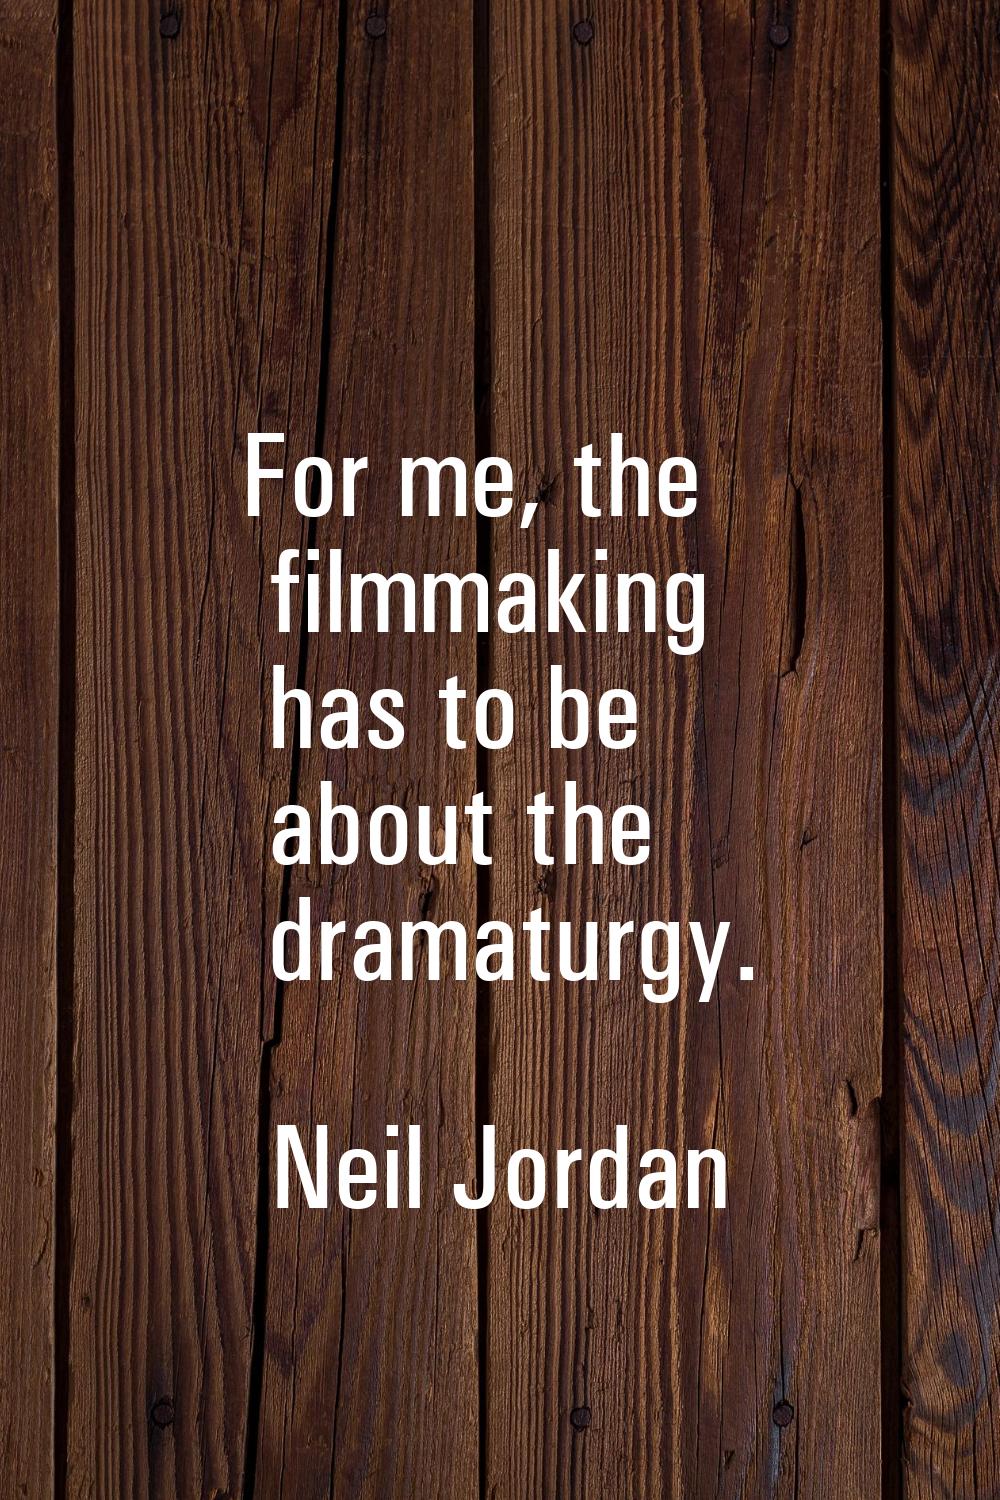 For me, the filmmaking has to be about the dramaturgy.